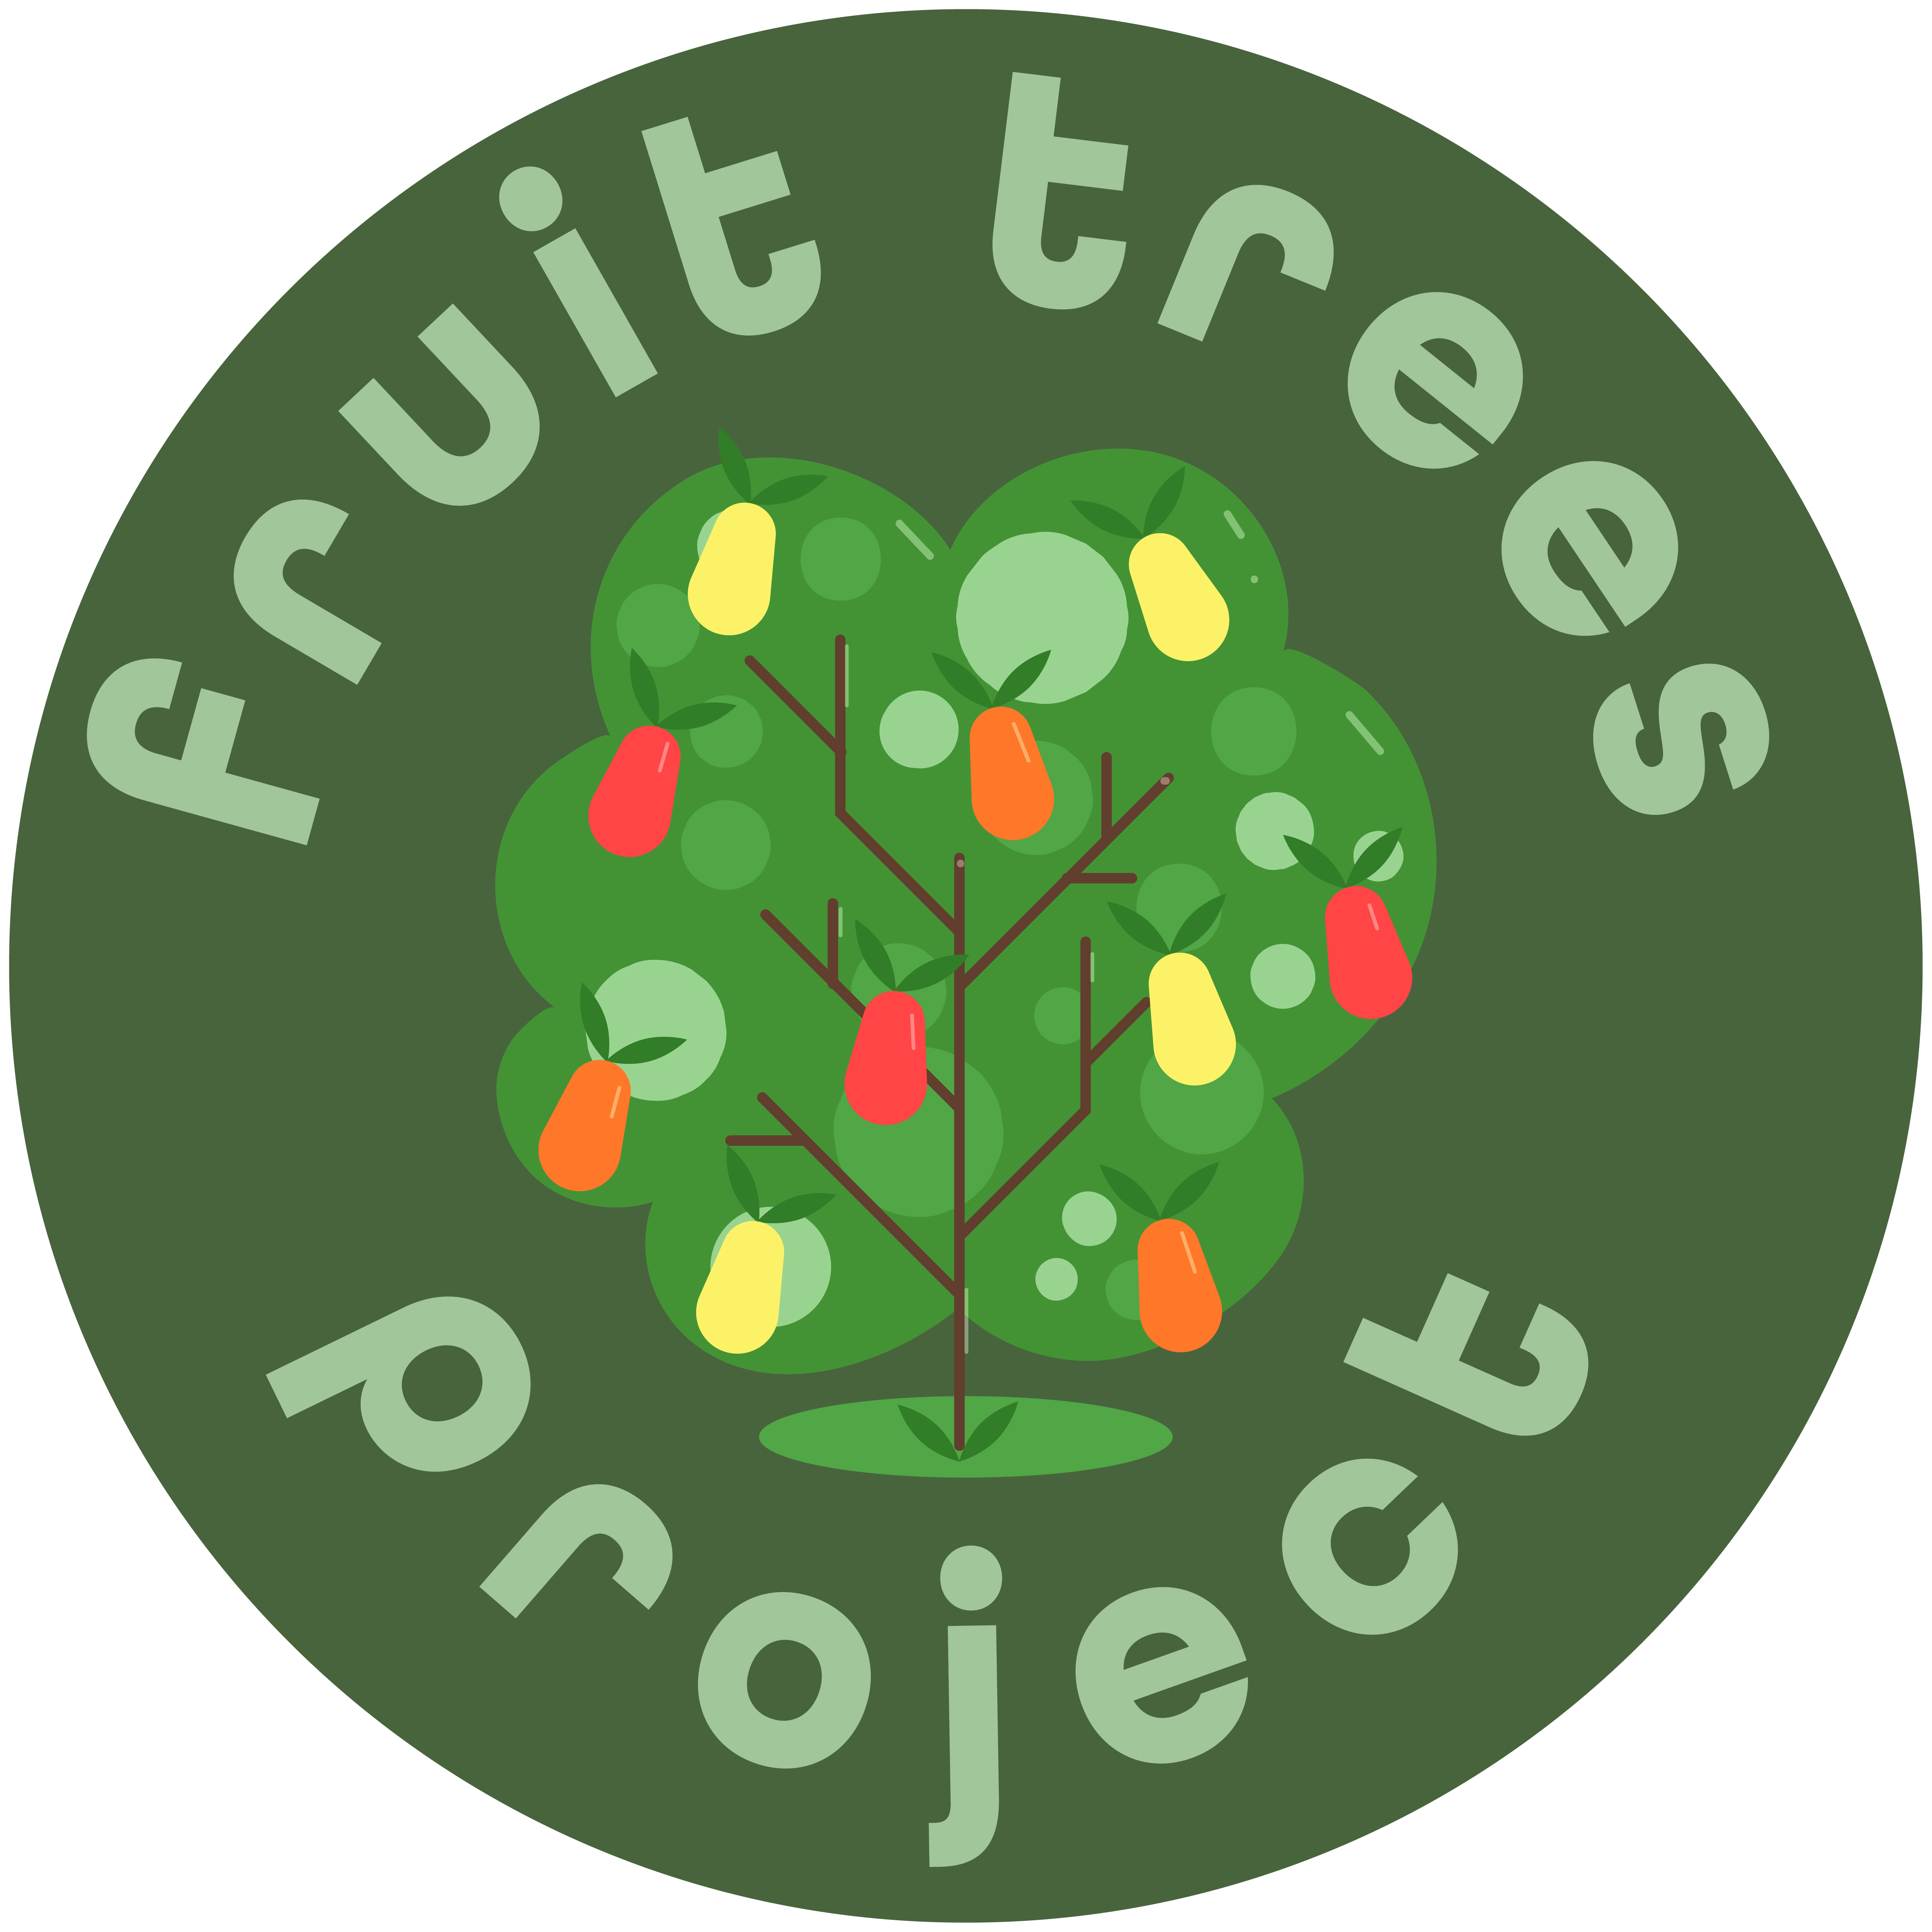 fruit trees project, nature, world, save the world, plant trees, brazil, united states, europe, we need some trees, how to reverse climate change